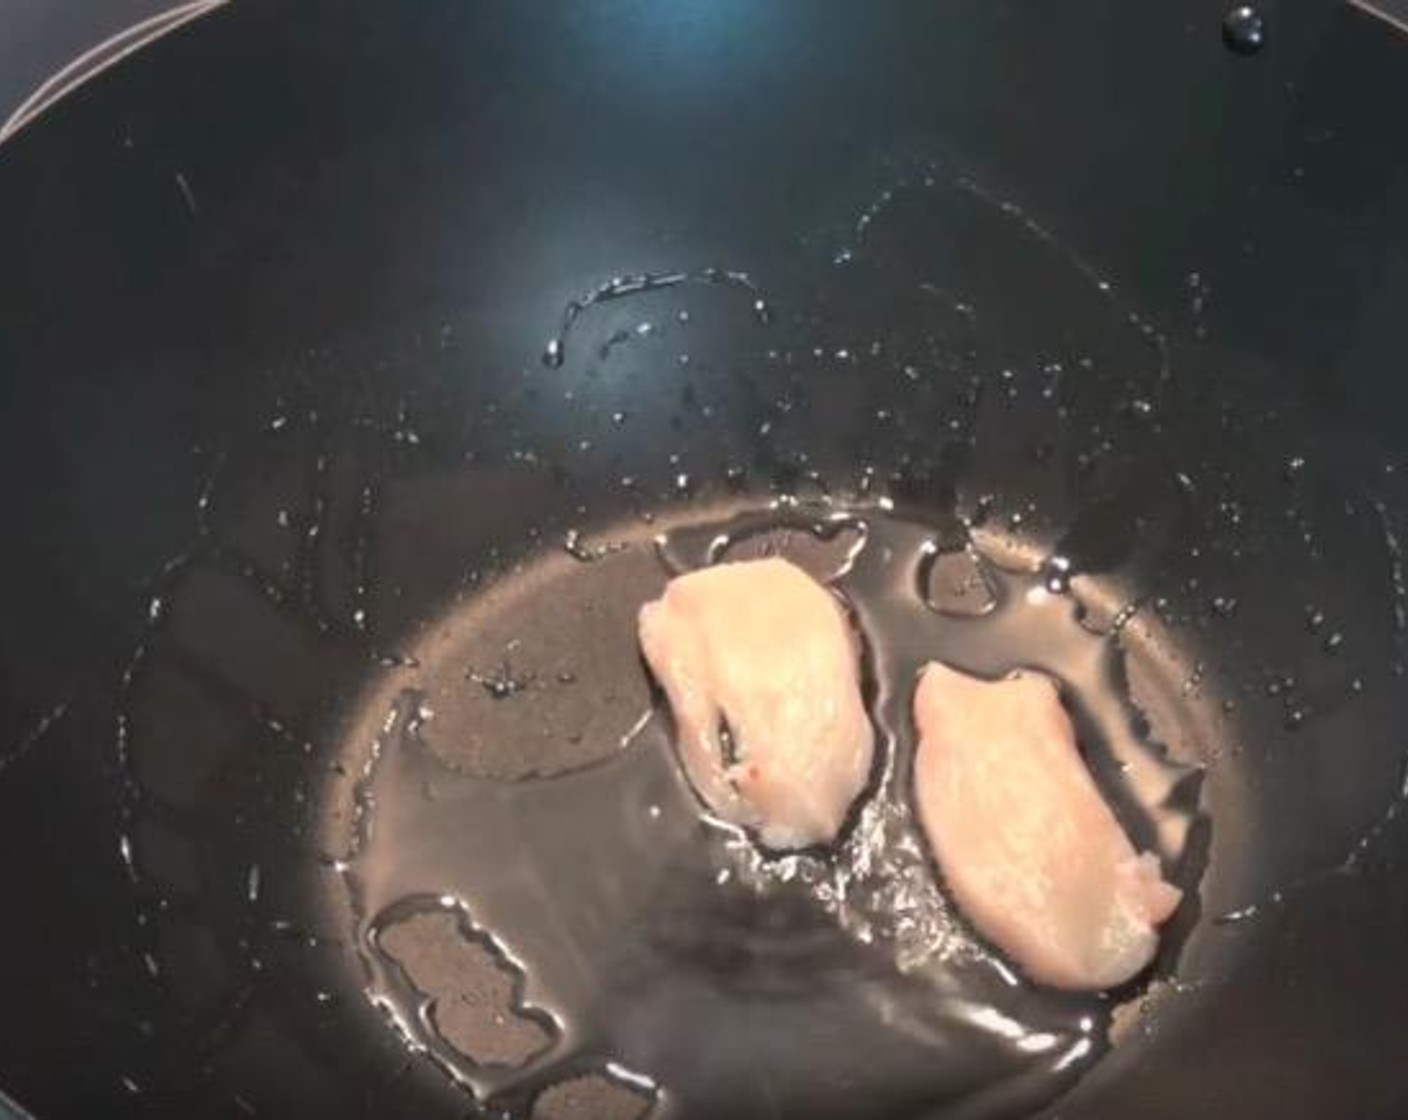 step 3 In a wok or fry pan over high heat, add Vegetable Oil (1 Tbsp). Add Chicken Breasts (1.1 lb). Cook in batches for 4-5 minutes, or until the chicken is just cooked. Transfer to a plate as finished.